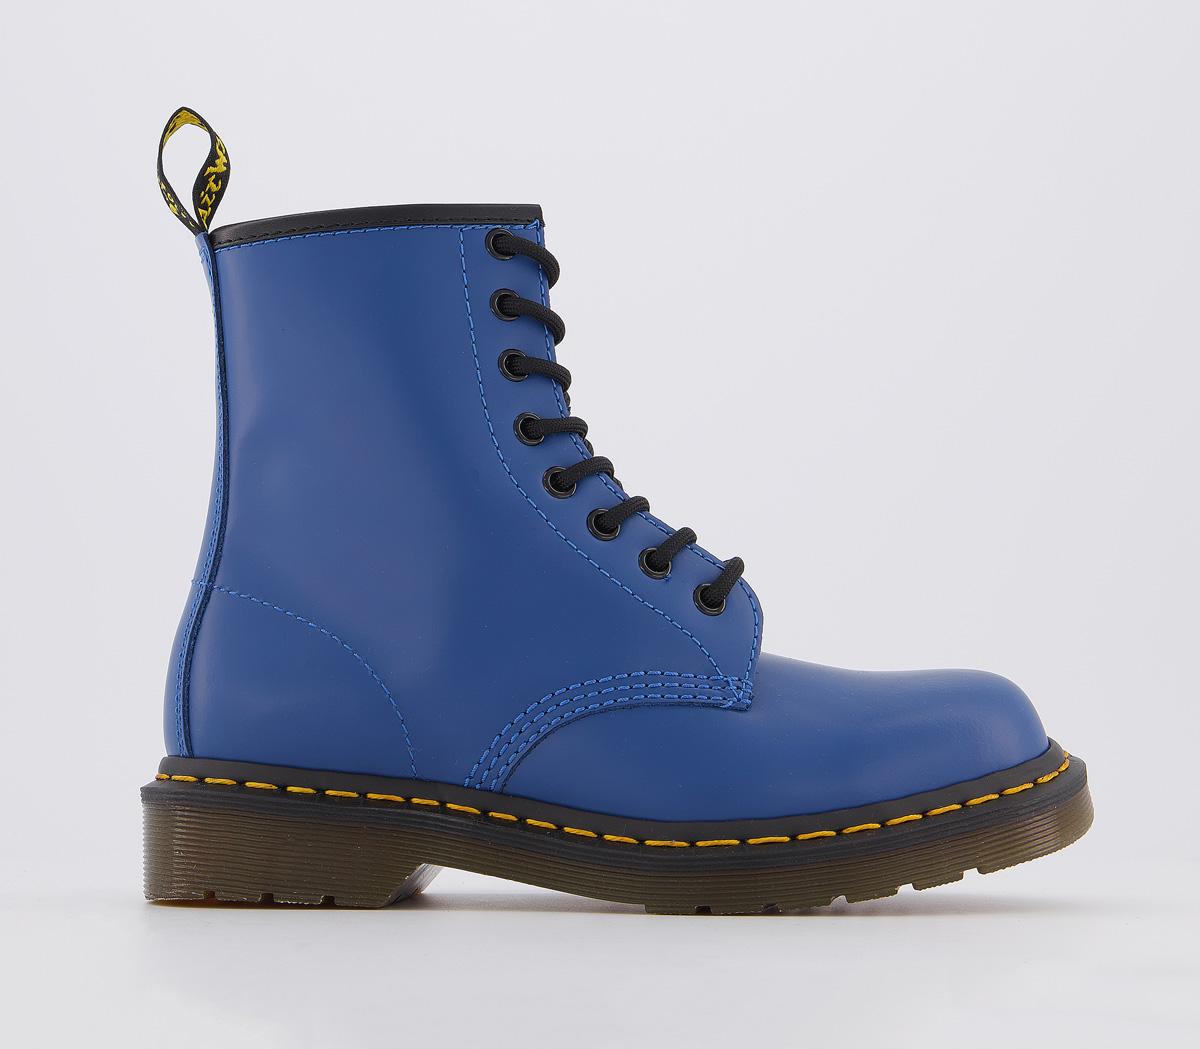 Dr. Martens 8 Eyelet Lace Up Boots Blue - Ankle Boots